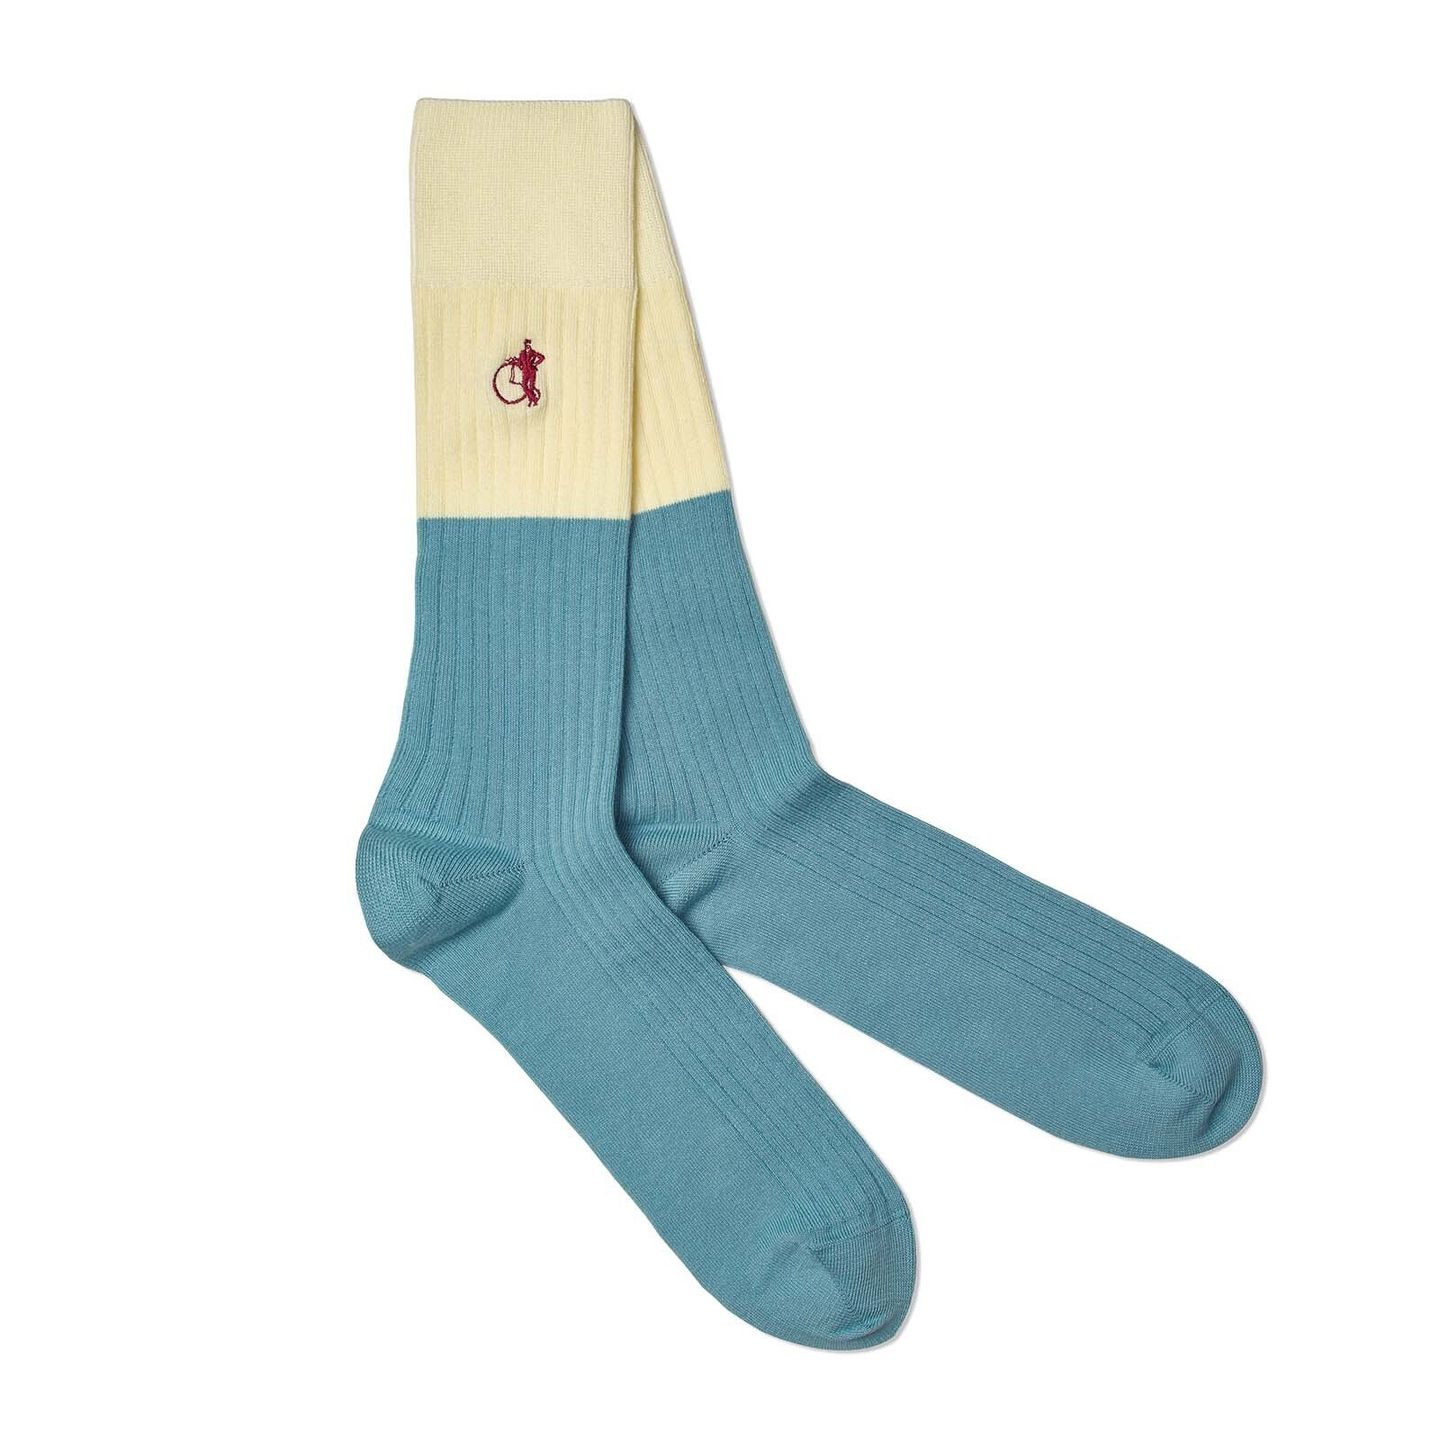 2 toned sock, with the calf in cream and the lower part in a light blue called the Smoke